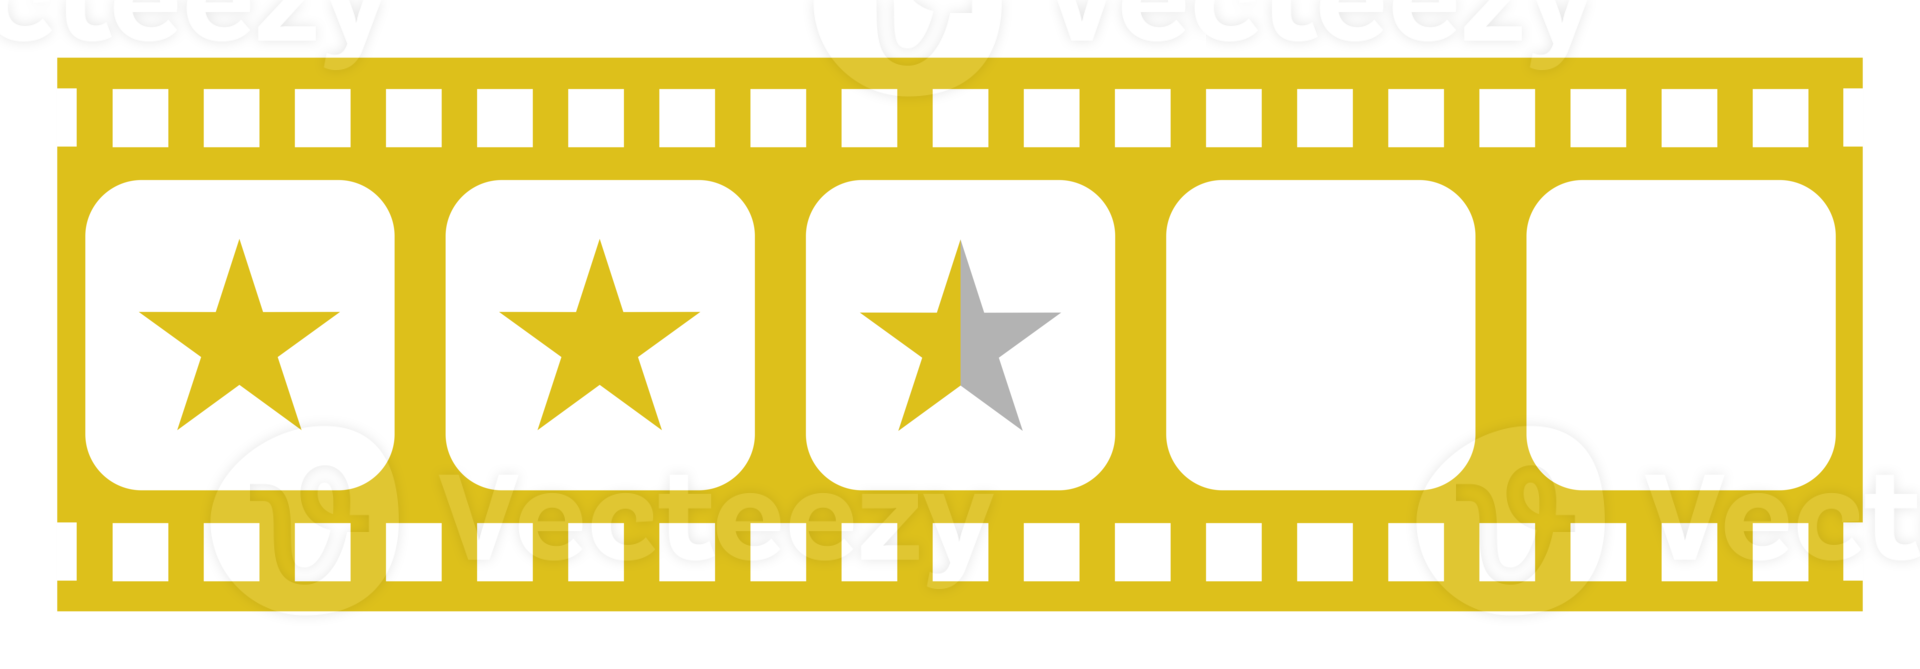 Visual of the Five 5 Star Sign in the Film Stripe Silhouette. Star Rating Icon Symbol for Film or Movie Review, Pictogram, Apps, Website or Graphic Design Element. Rating 2,5 Star. Format PNG